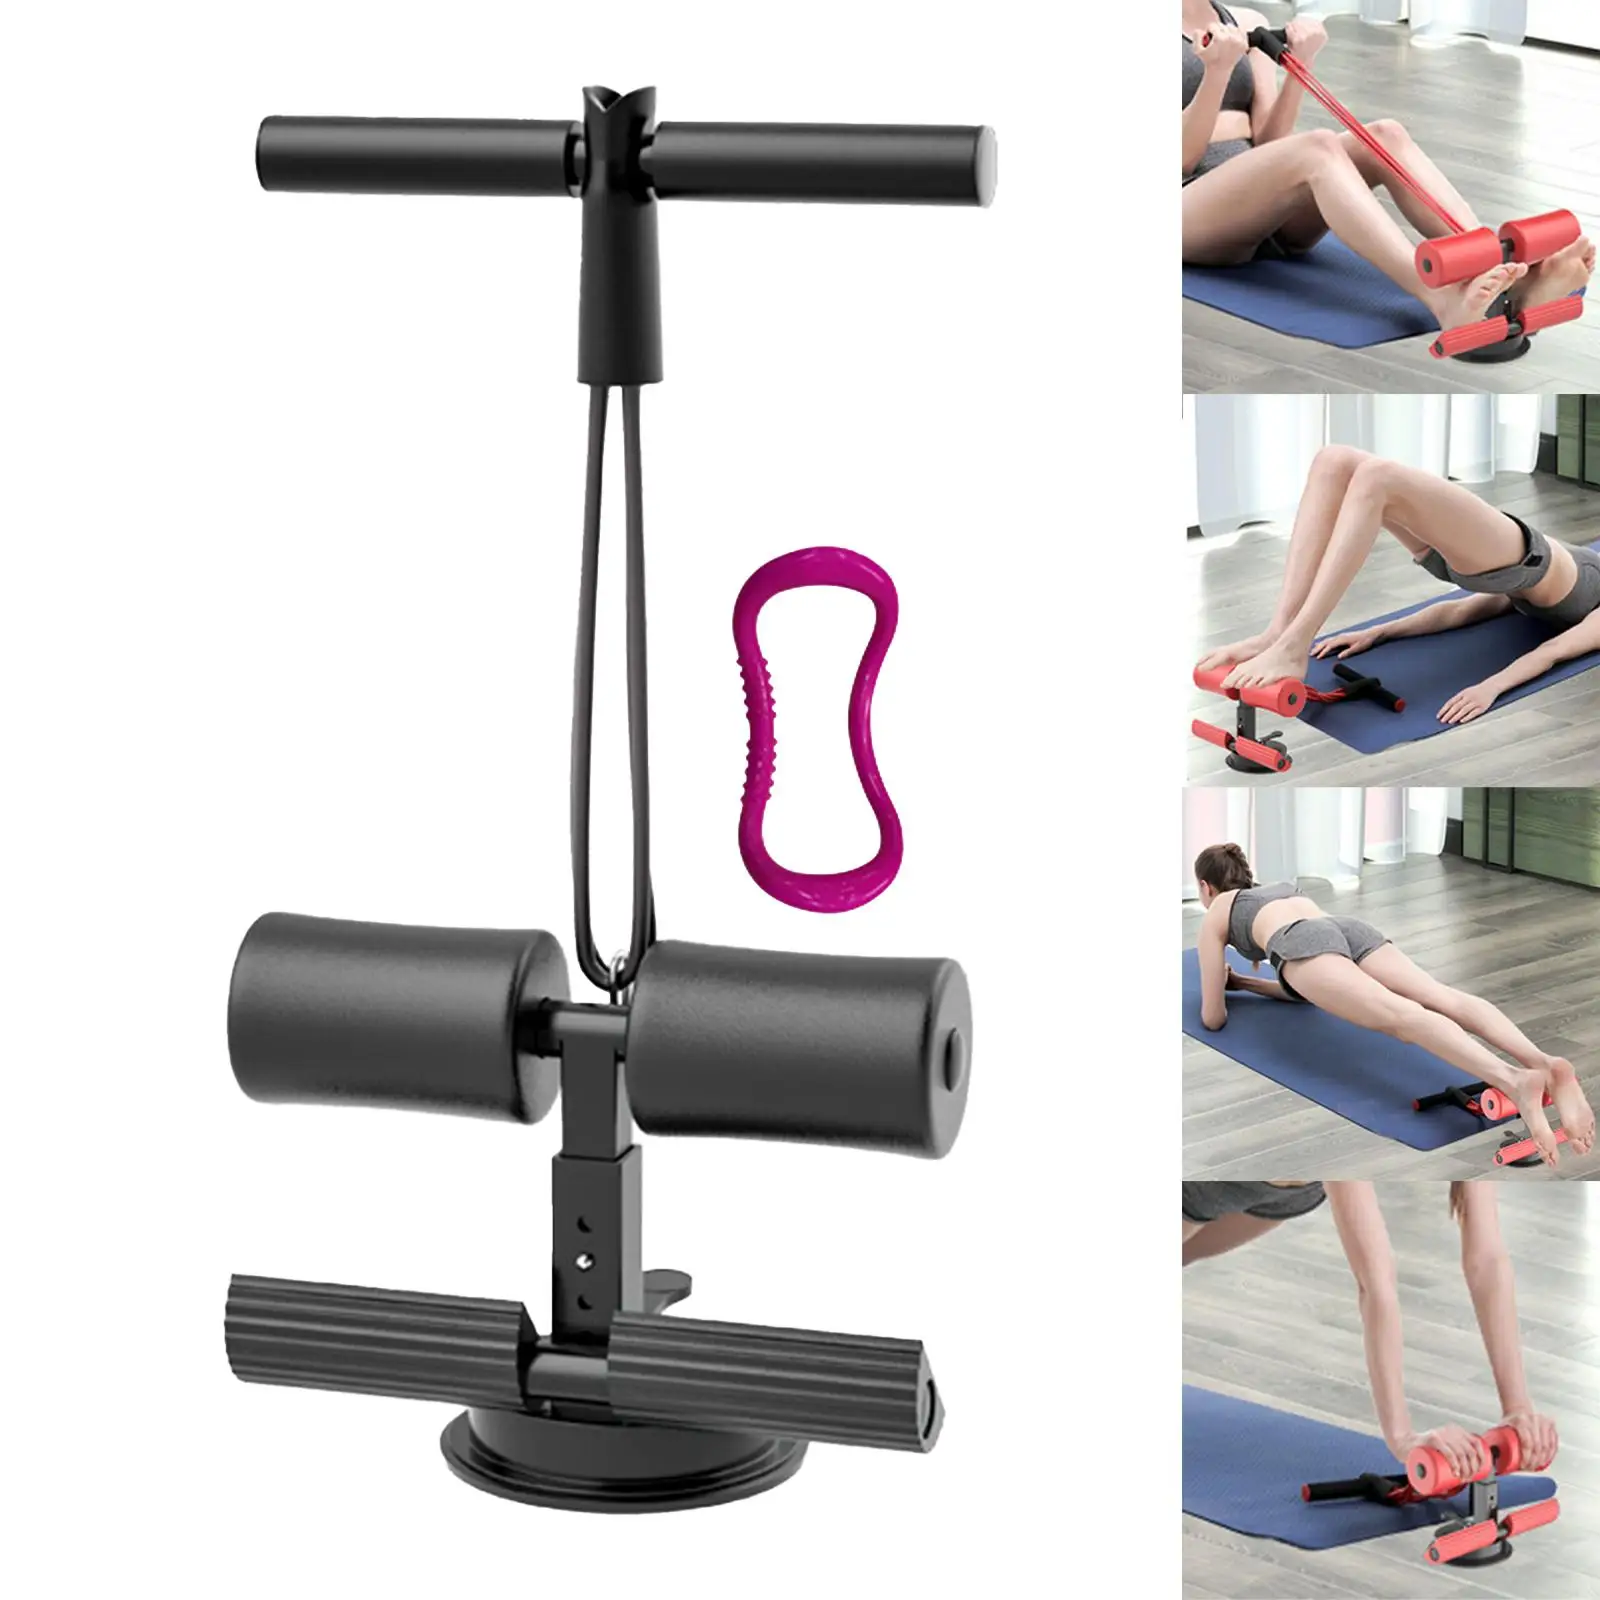 Sit up Rack Device Adjustable Accs Machine Ankle Support for Travel Workout Sports